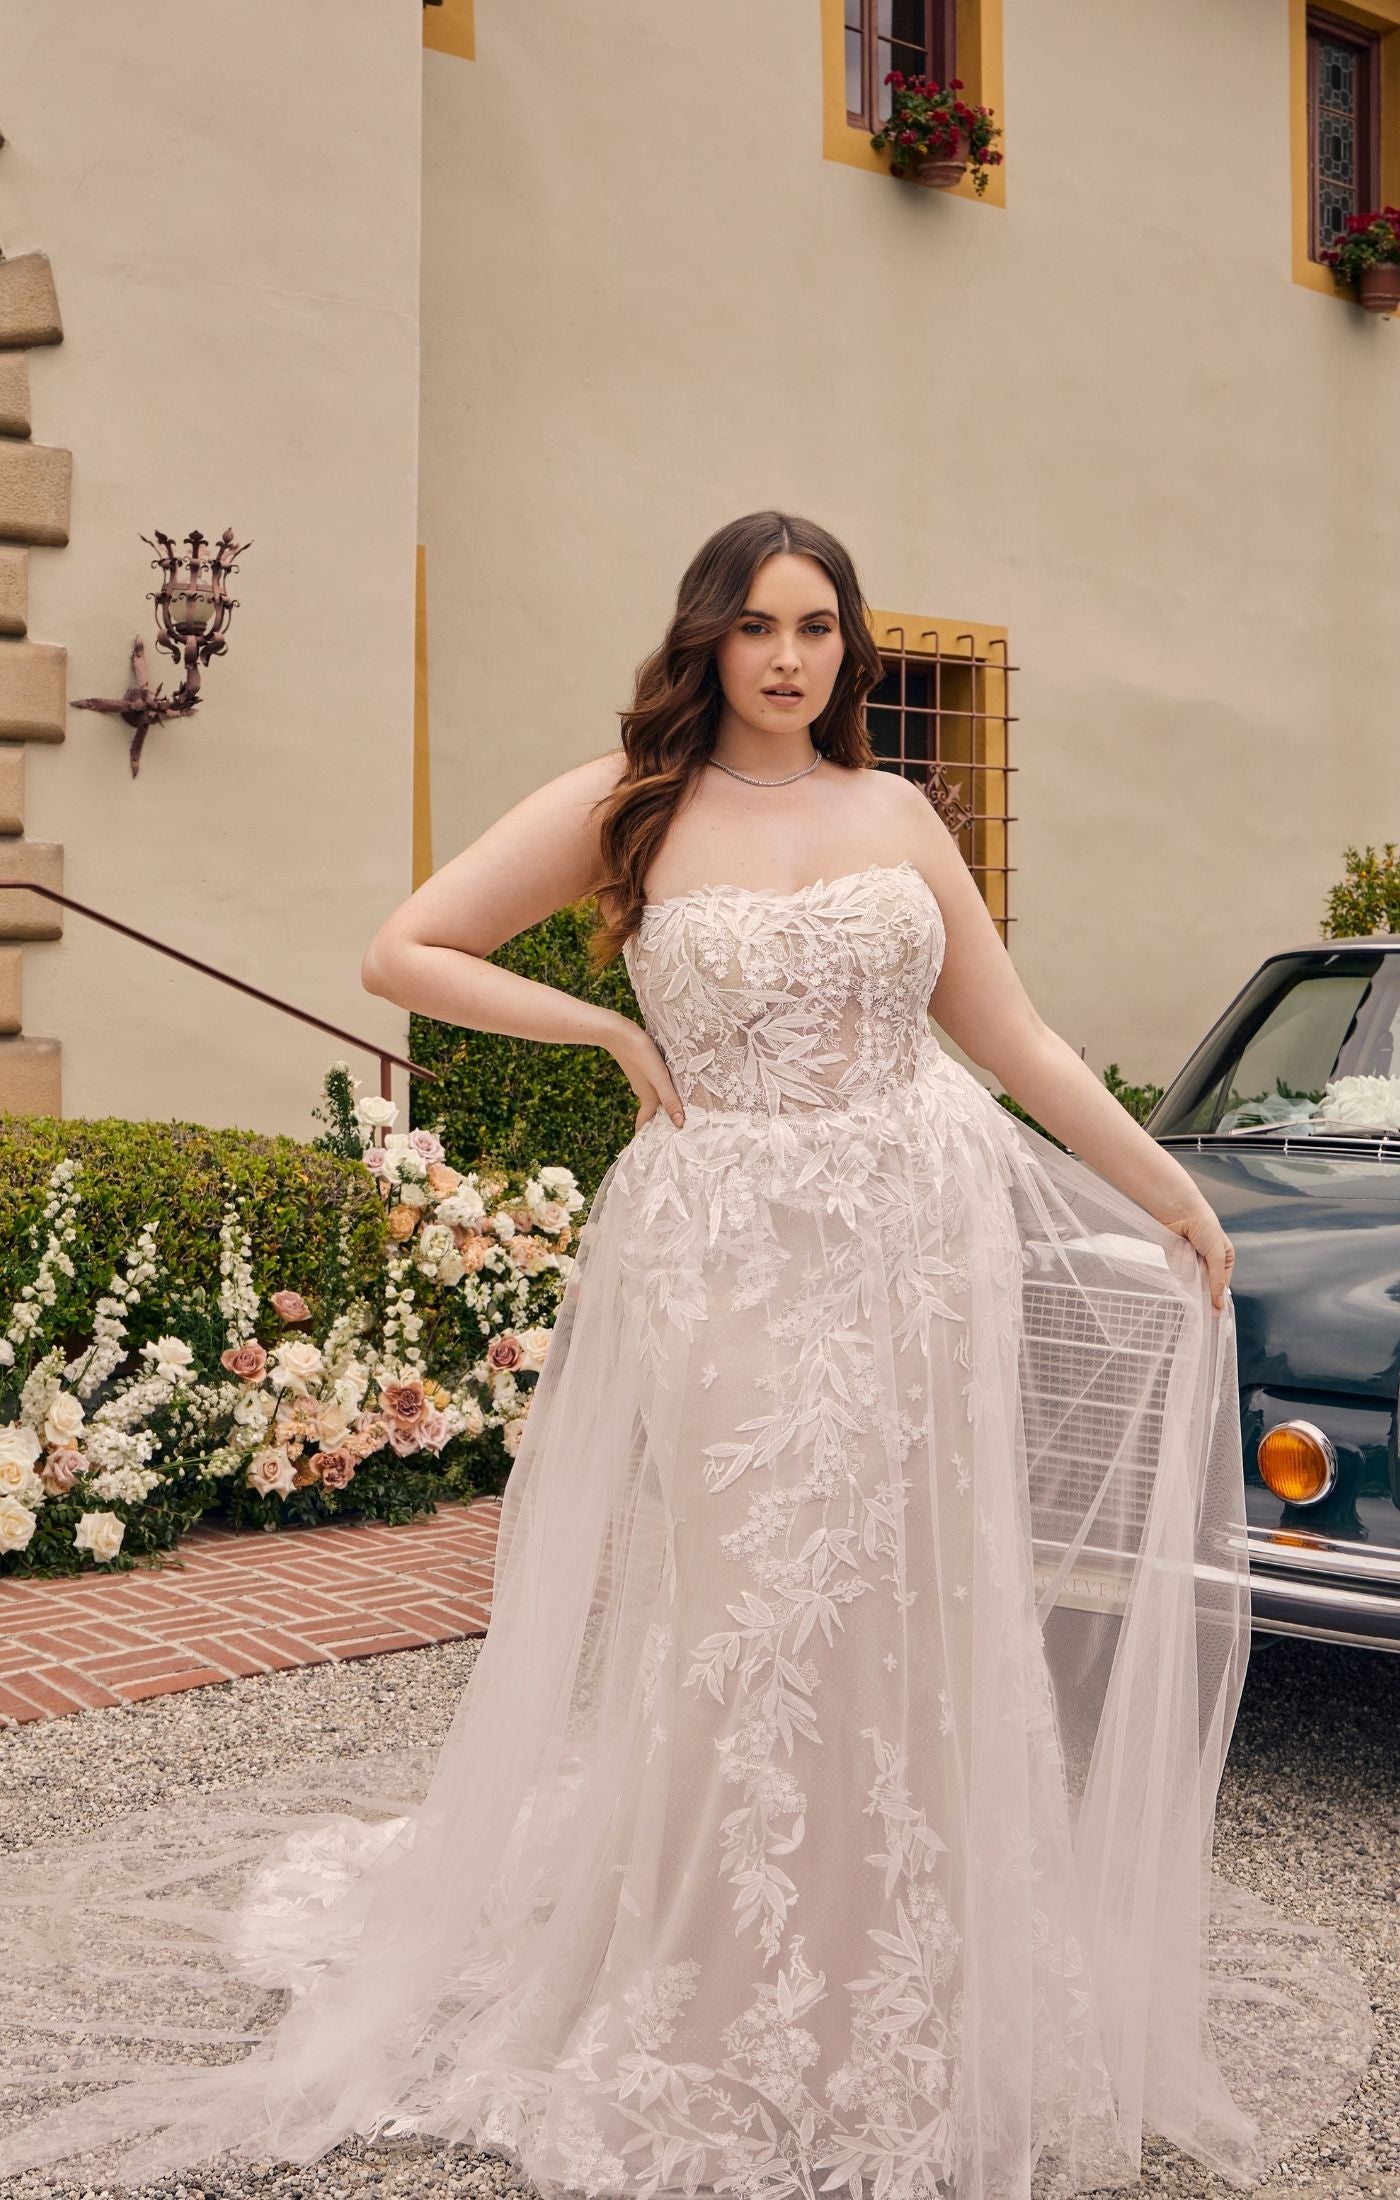 Casablanca Bridal 2548 Jacqueline A-Line Ballgown Off The Shoulder Sheer Floral Tulle Appliques Train Wedding Dress. An A-Line skirt matching style 2548-1 made of tulle with sequined floral lace delicate trim at the waistline.